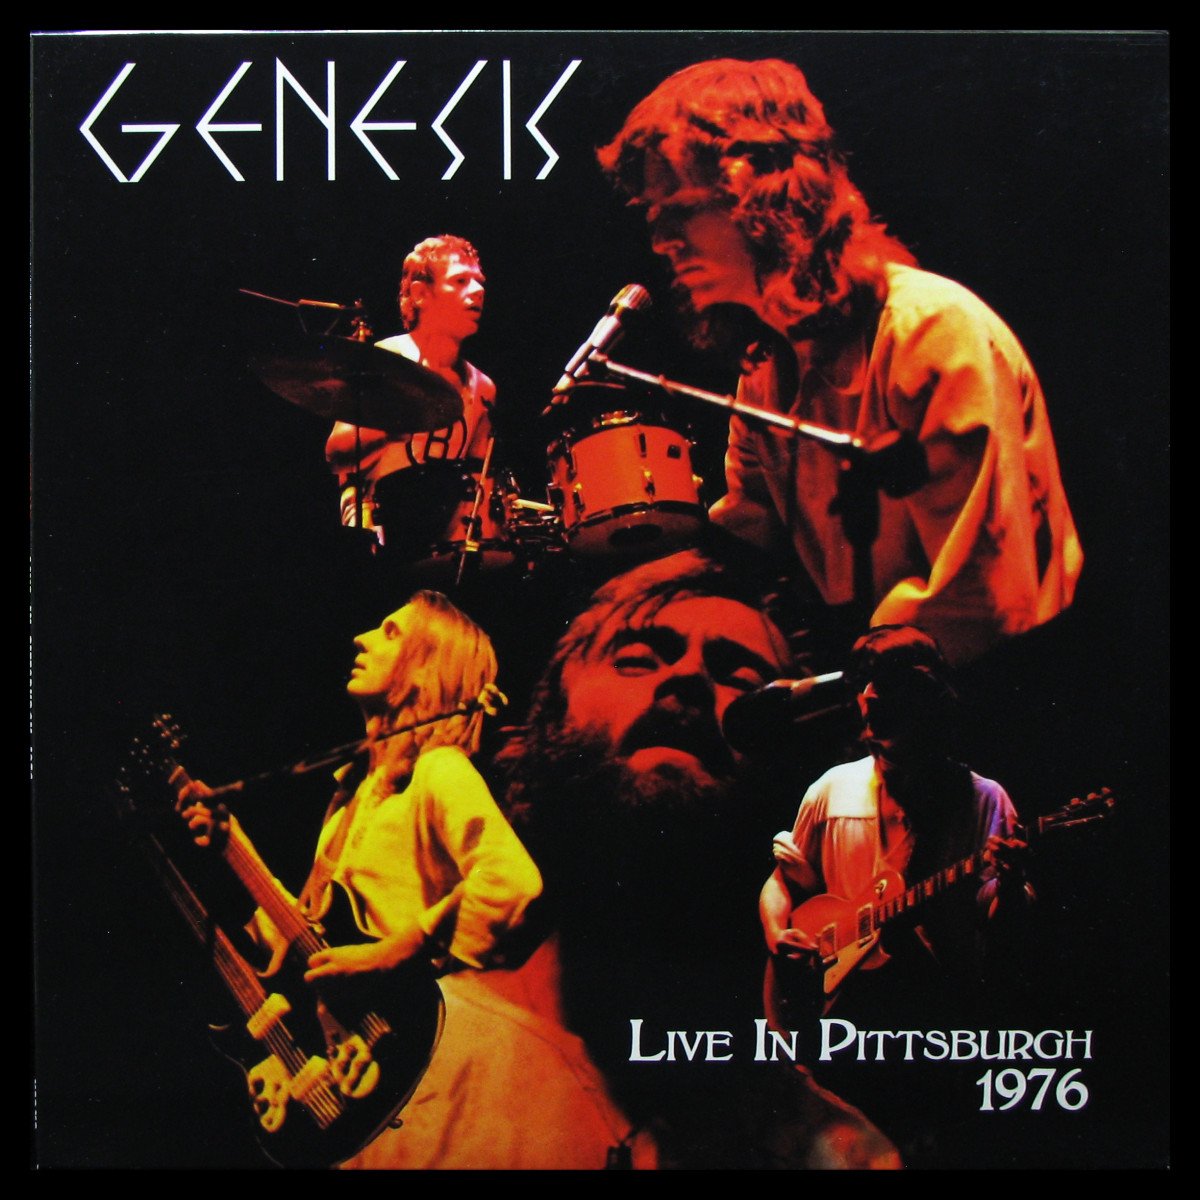 Live In Pittsburgh 1976